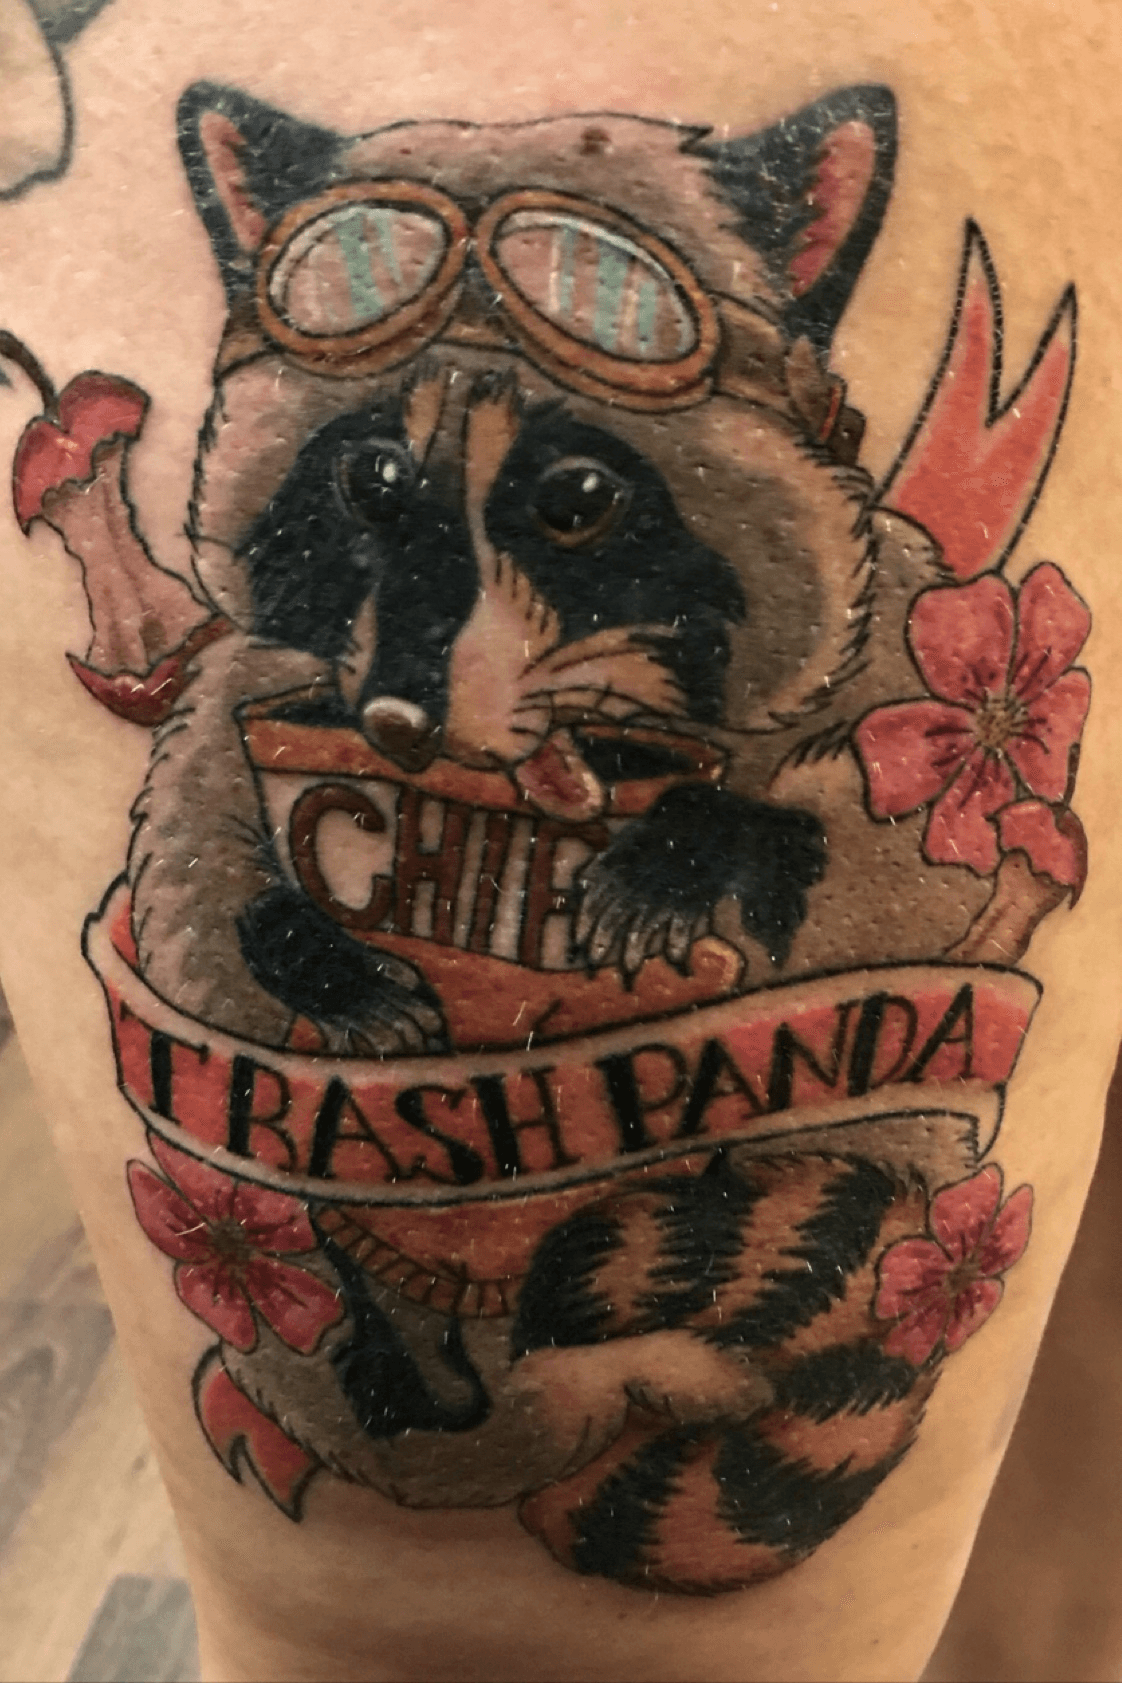 New trash panda chef By Randorobartworkz from route 11 tattoo Hagerstown  Maryland  rtattoos